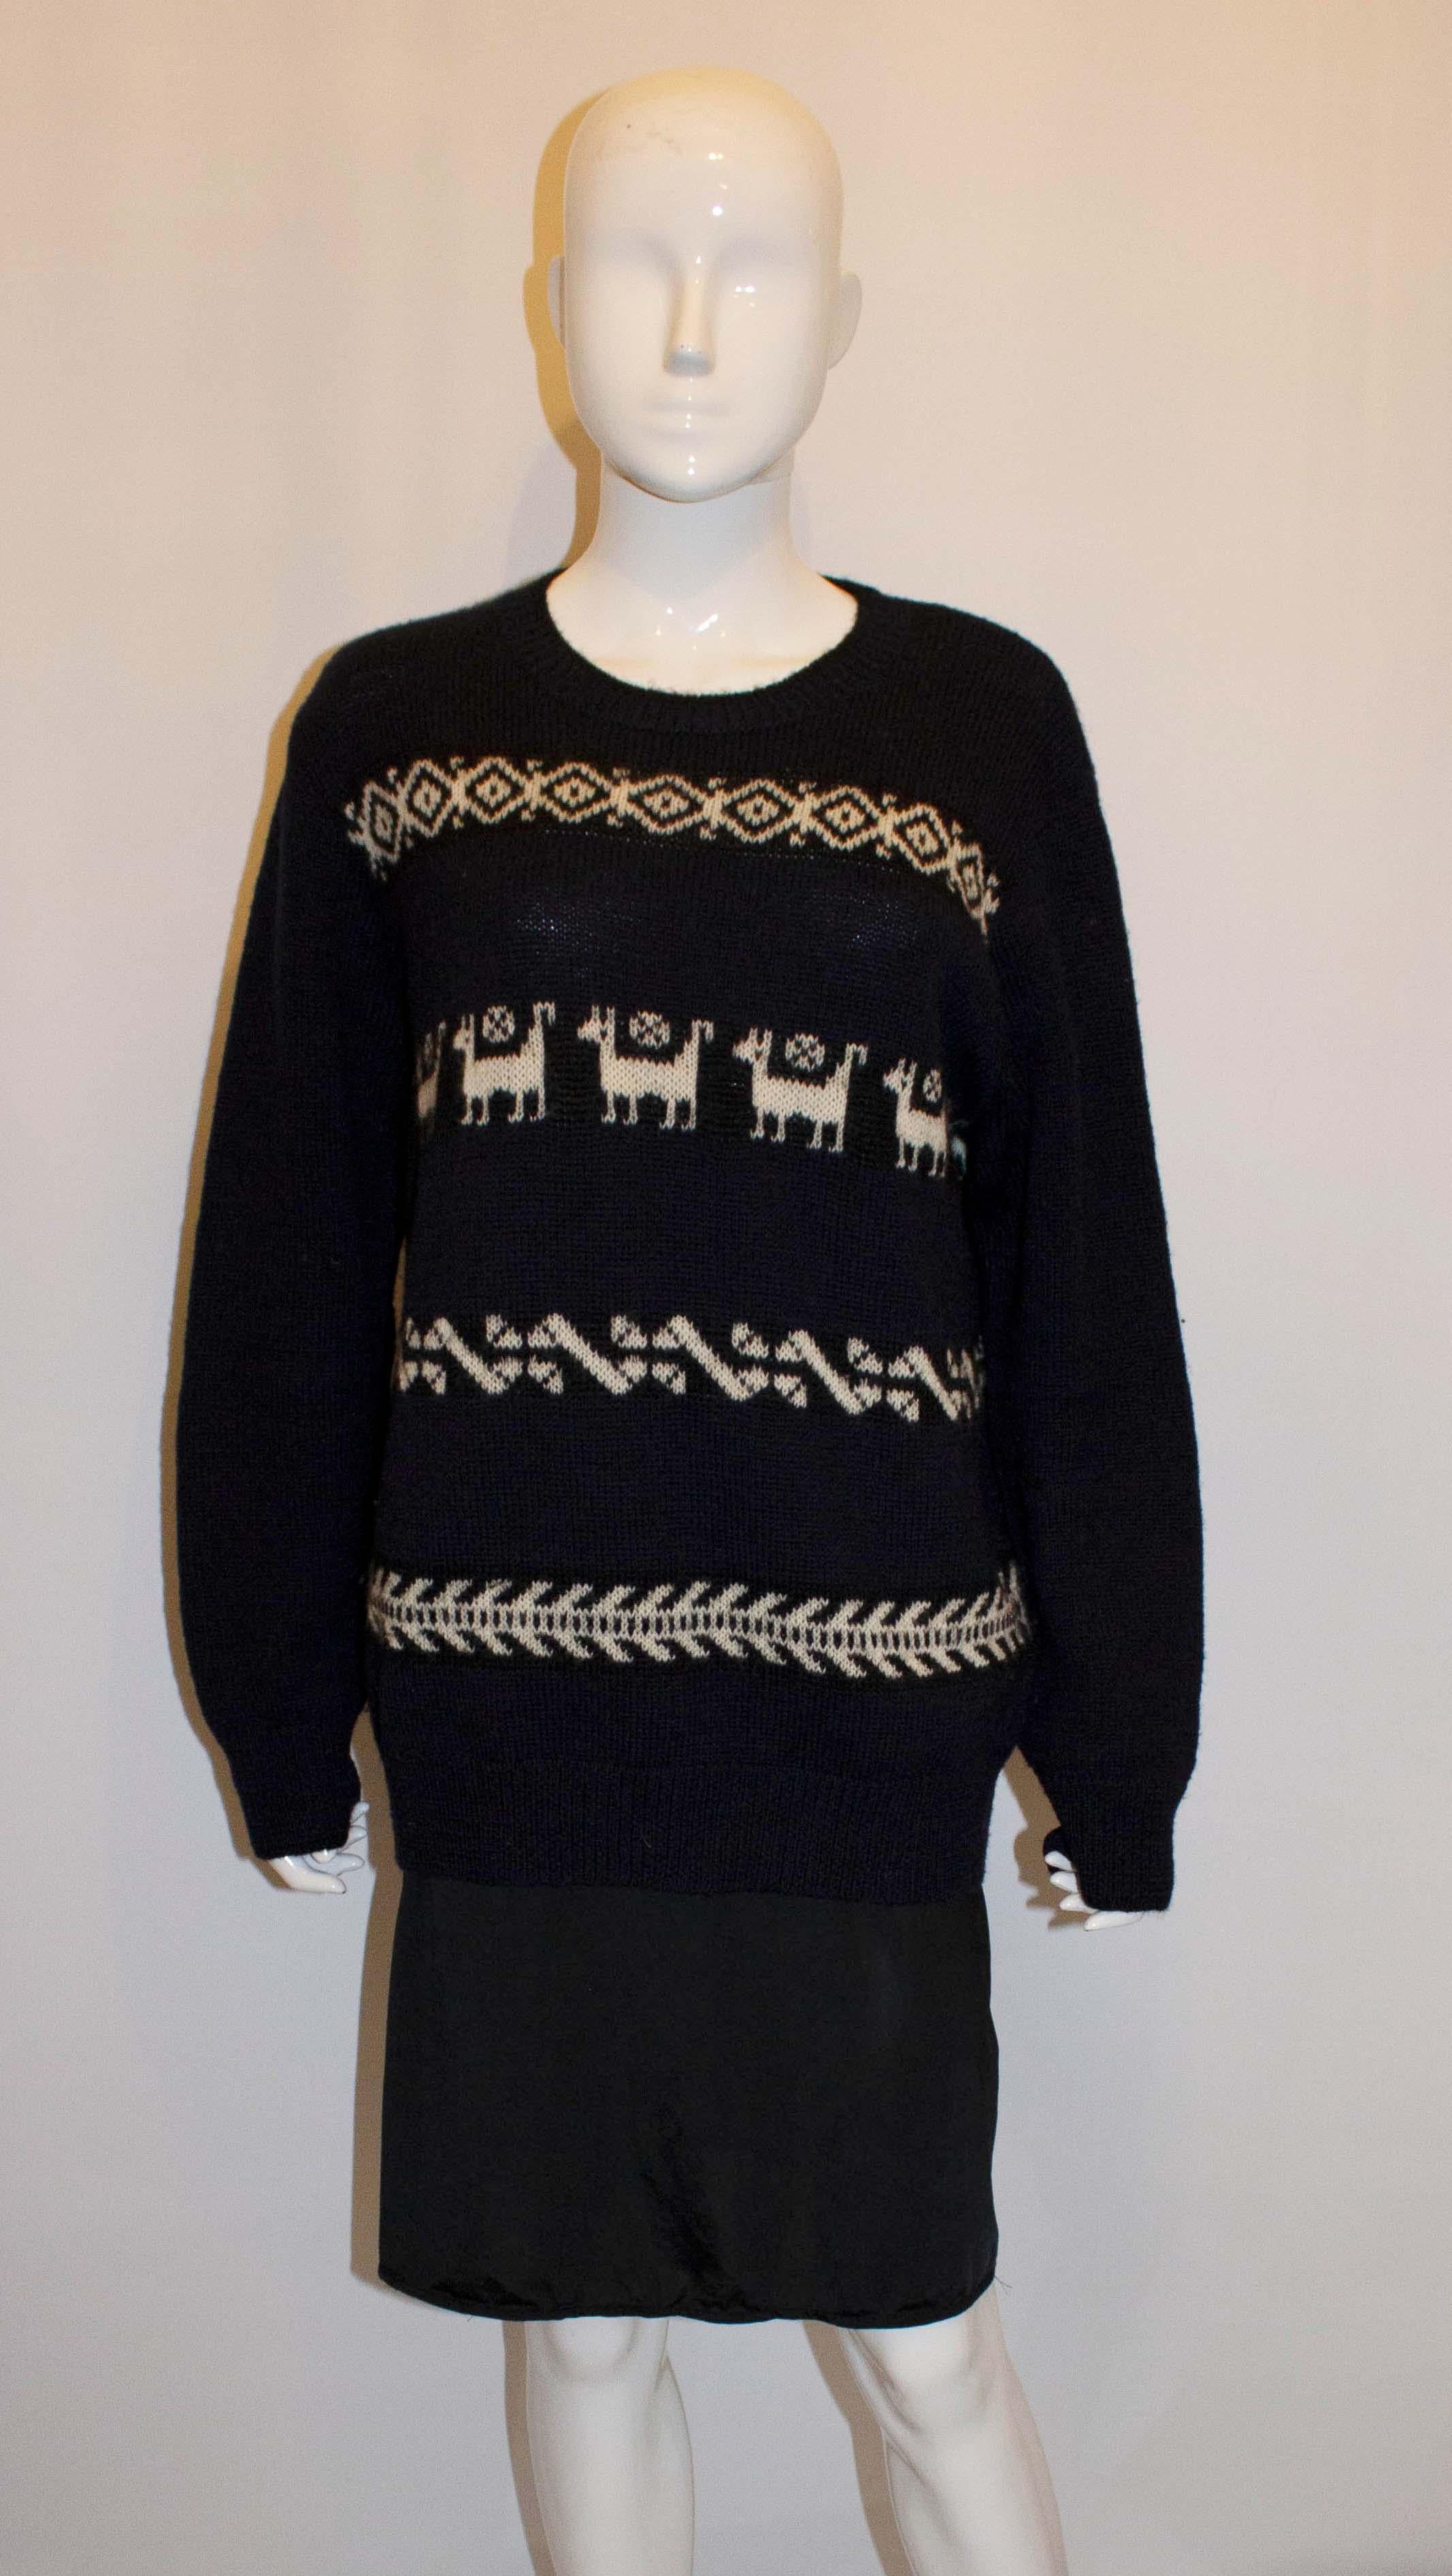 A wonderful jumper for Fall/ Winter by Dries van Noten. The jumper is in blue and white with a black trim around the neck and cuffs. Chest up to 50'', length 29''